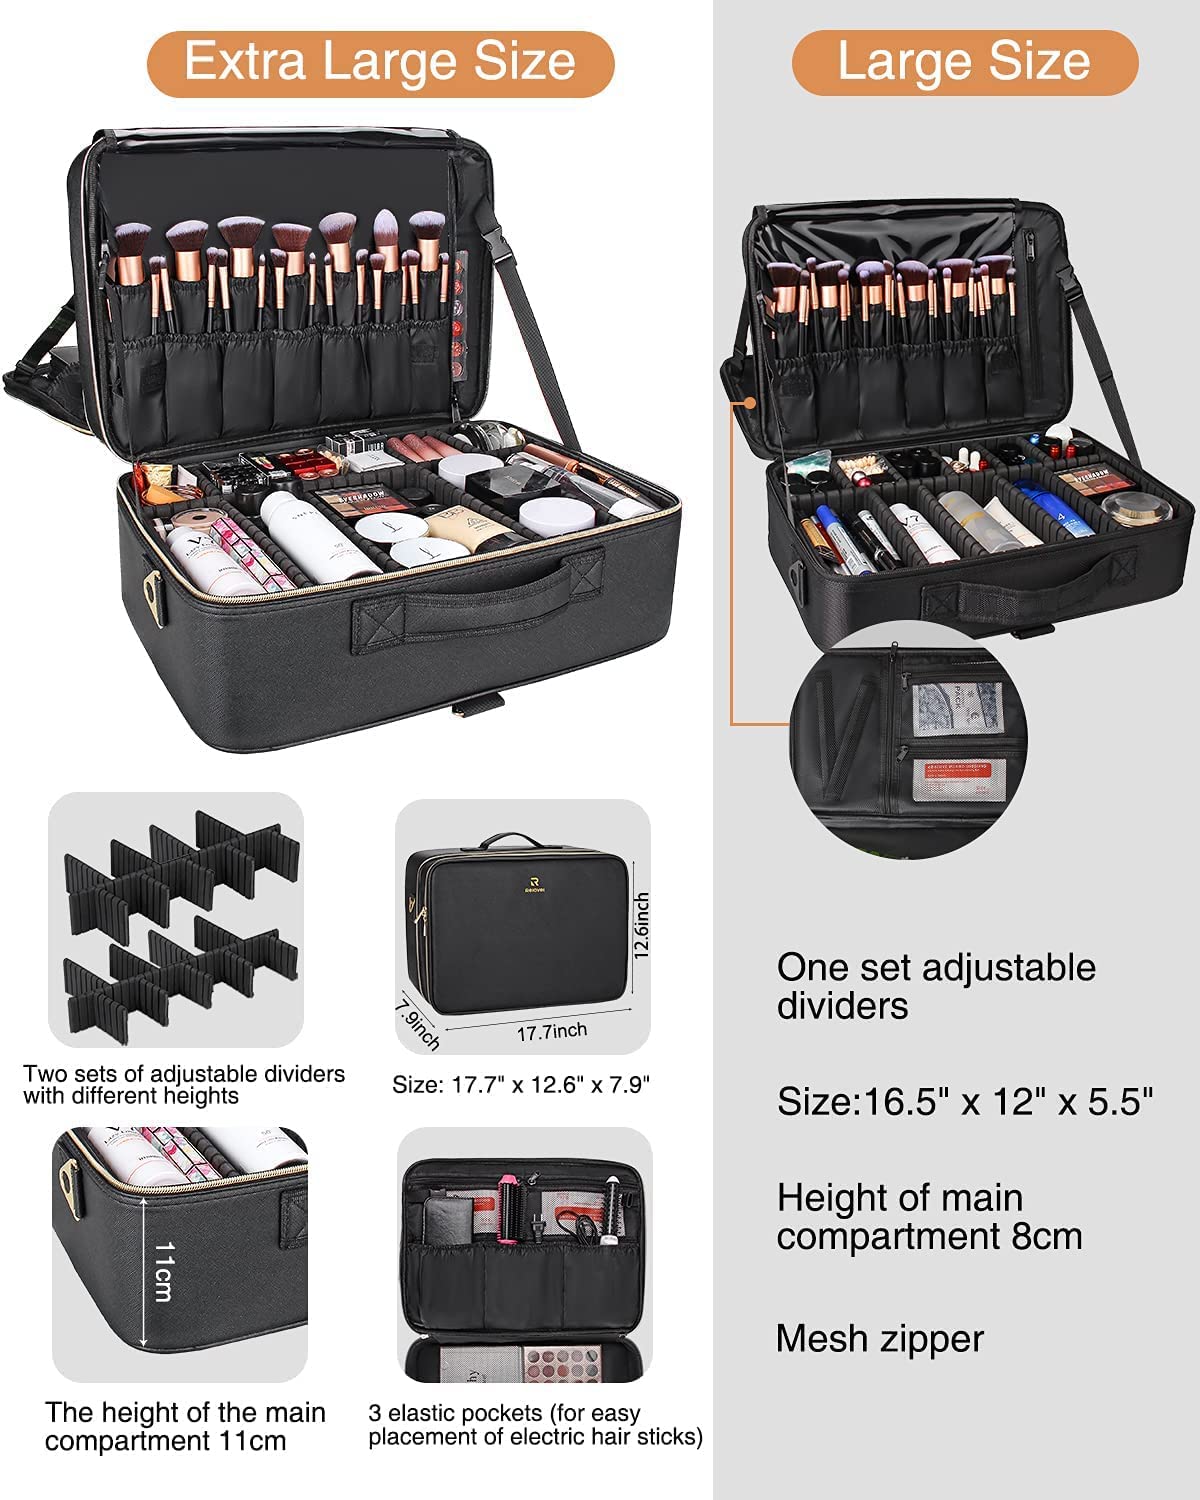 New Extra Large Makeup Case with Adjustable Dividers